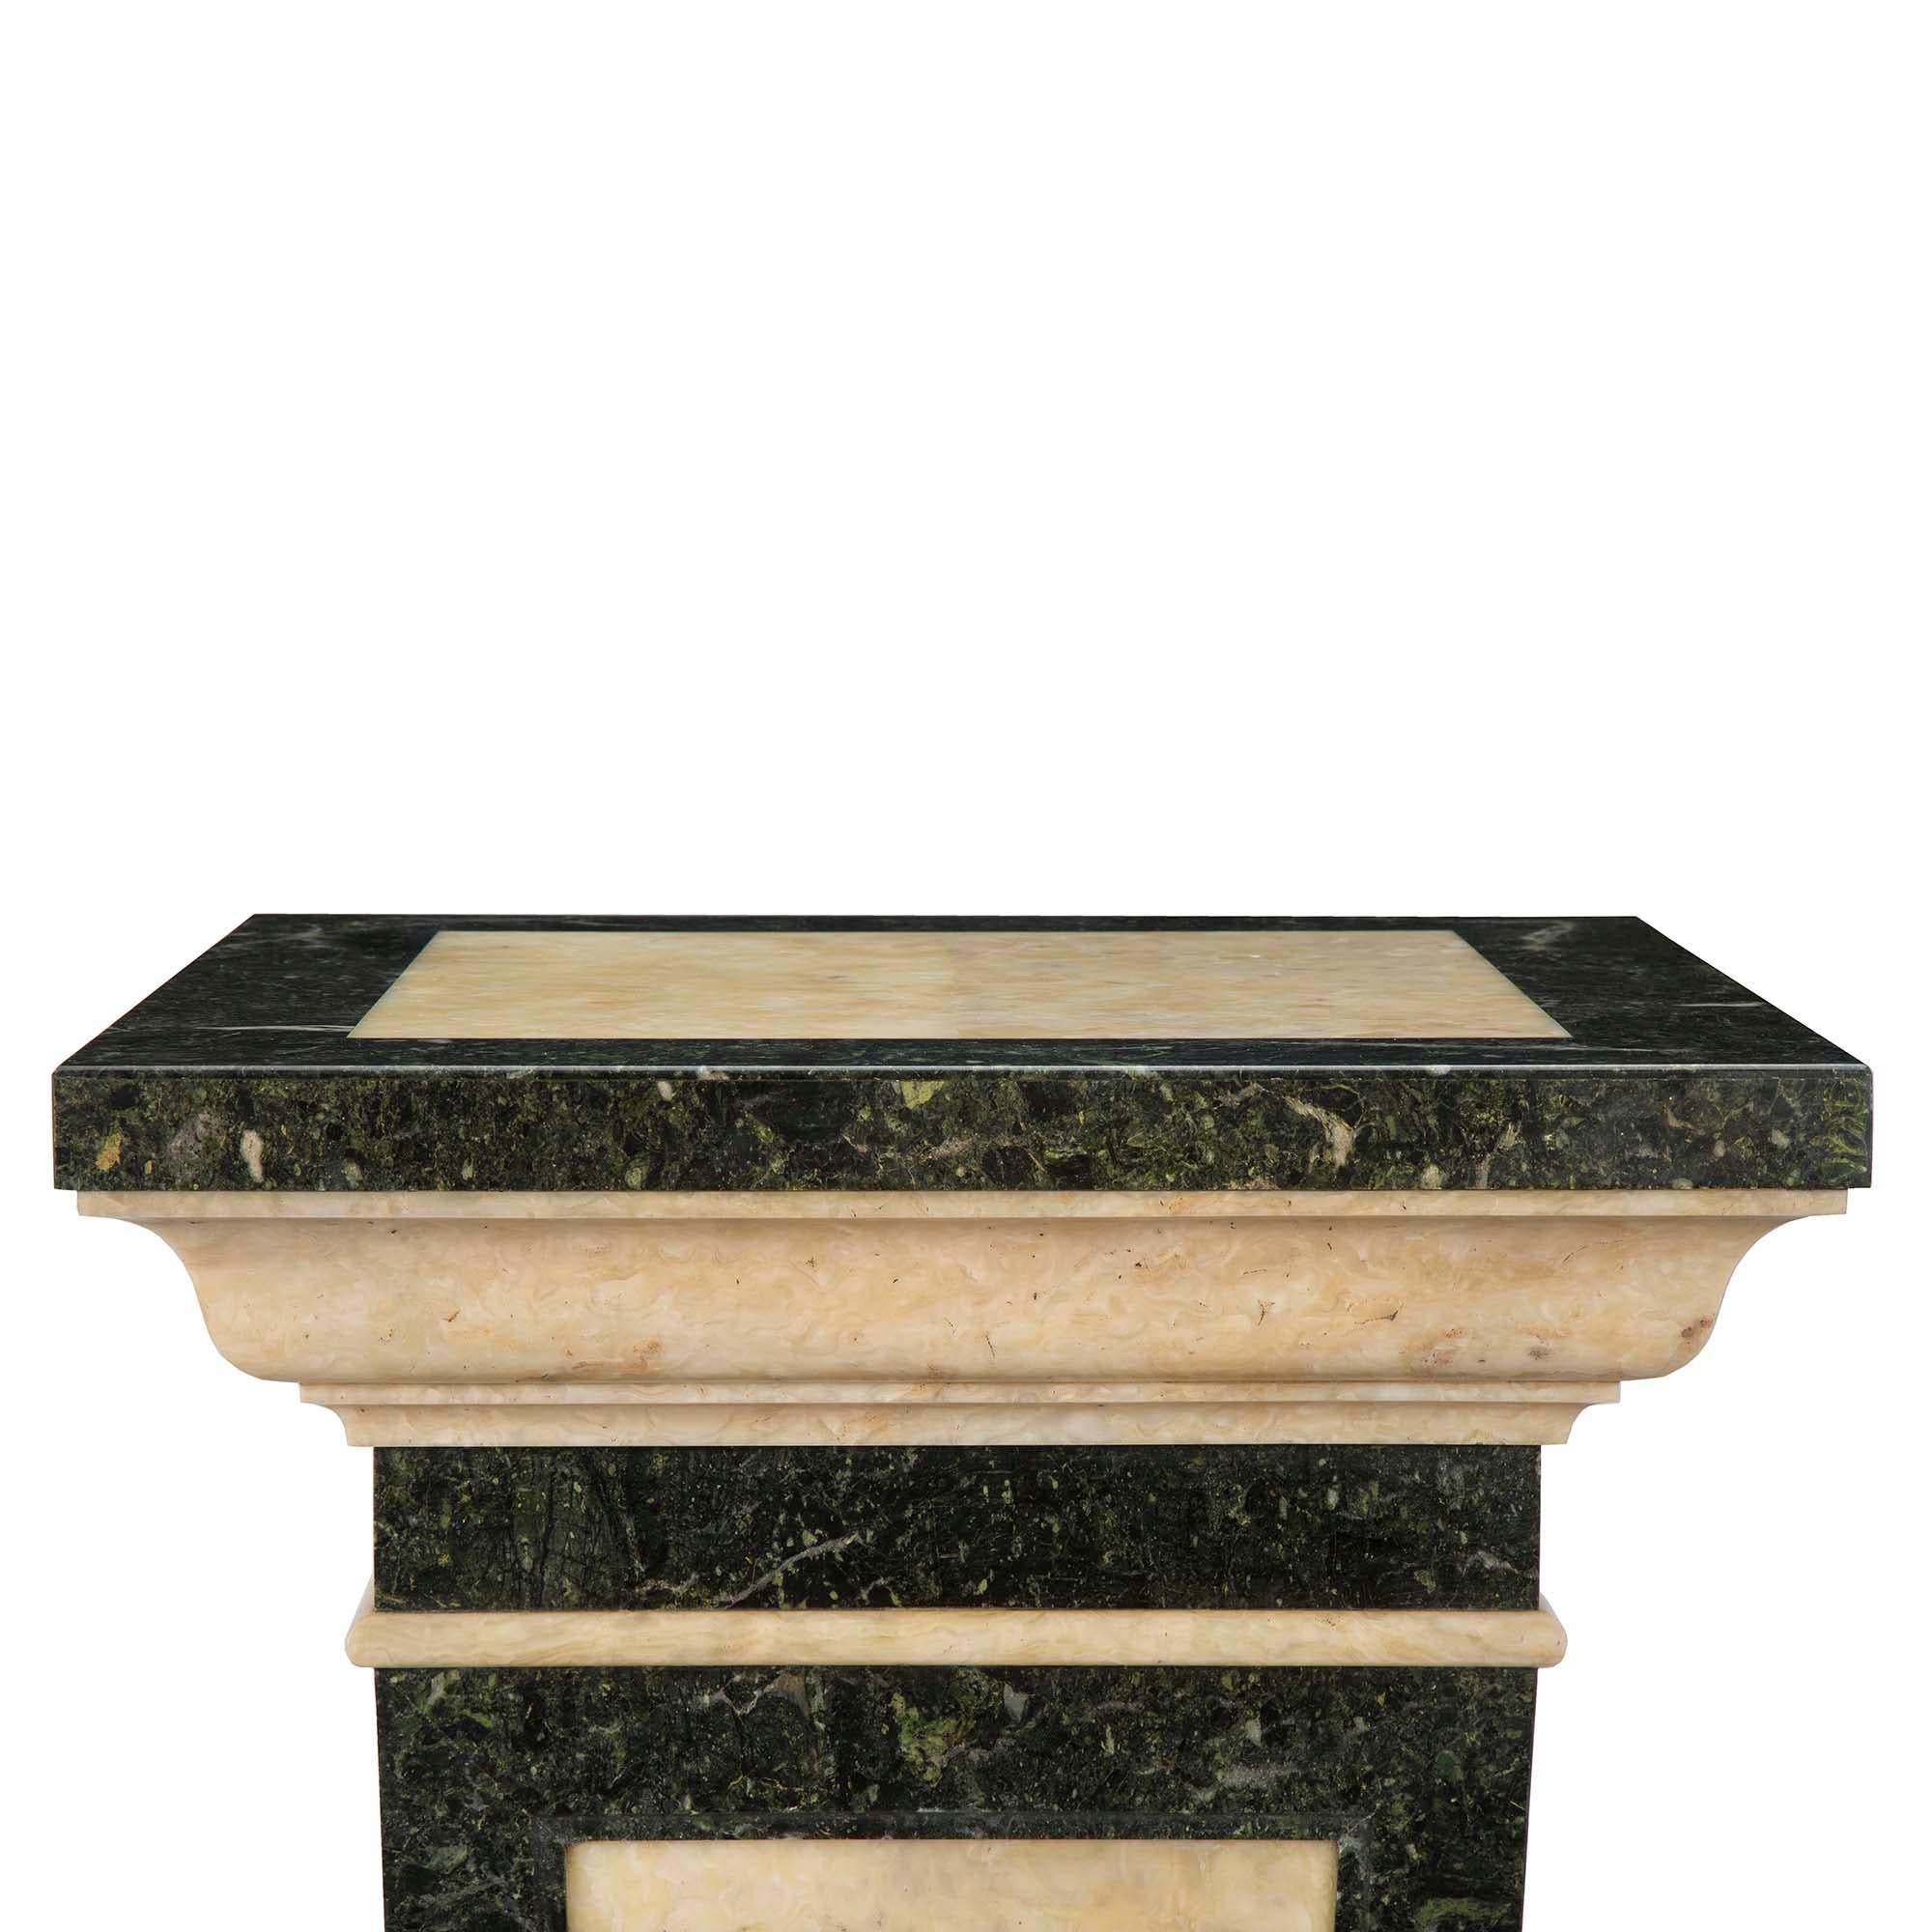 Italian Late 19th Century Neoclassical Style Alabaster and Marble Pedestal For Sale 2